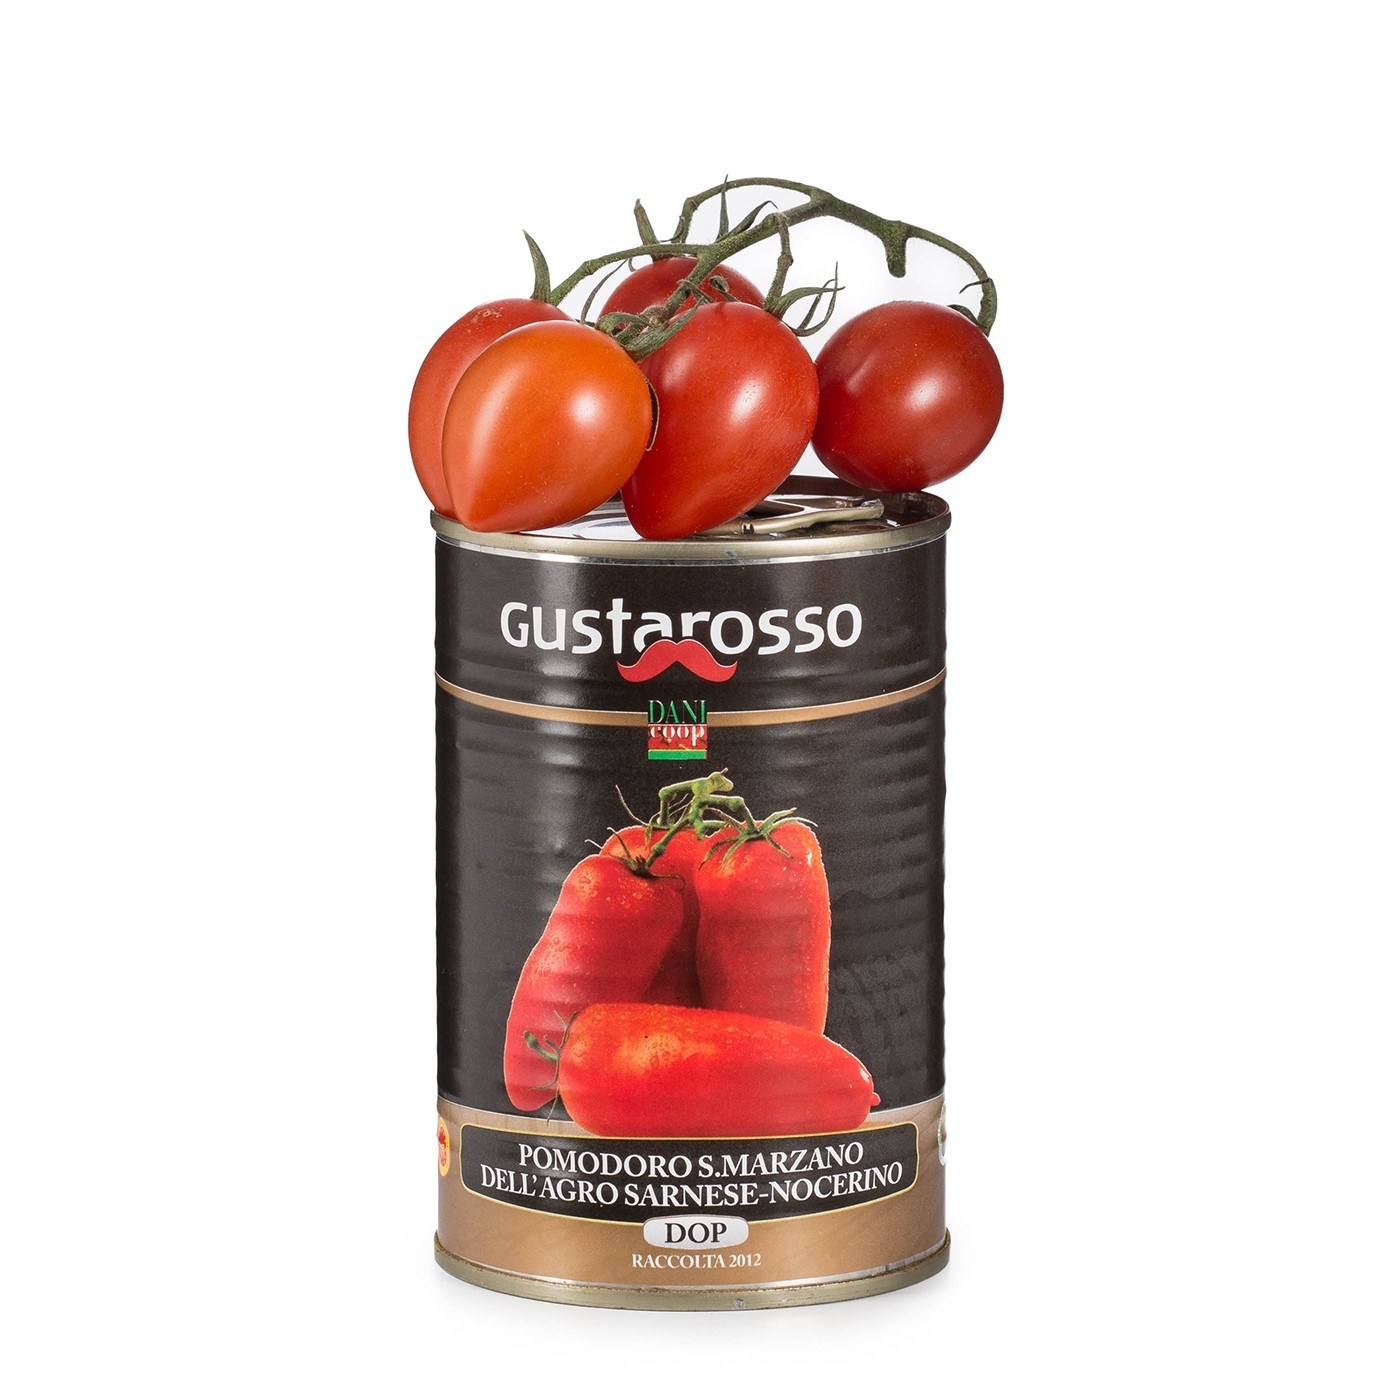 The can of tomatoes